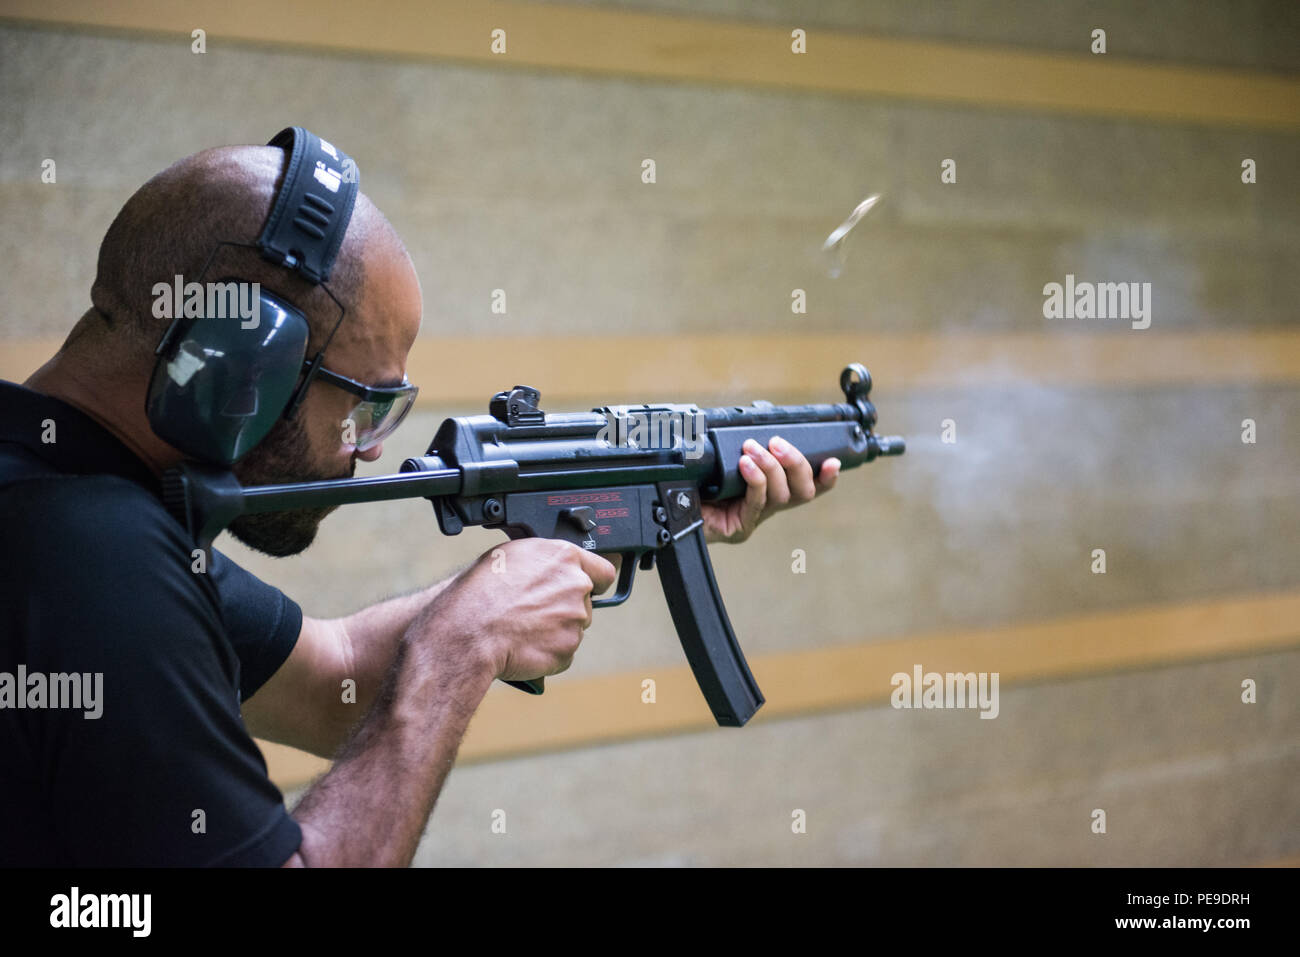 The Heckler Koch Mp5 Submachine Gun Of U S Air Force Senior Airman Samuel Caines Assigned To The Supreme Allied Commander Europe Security Detachment Ejects A Bullet Casing At The Training Support